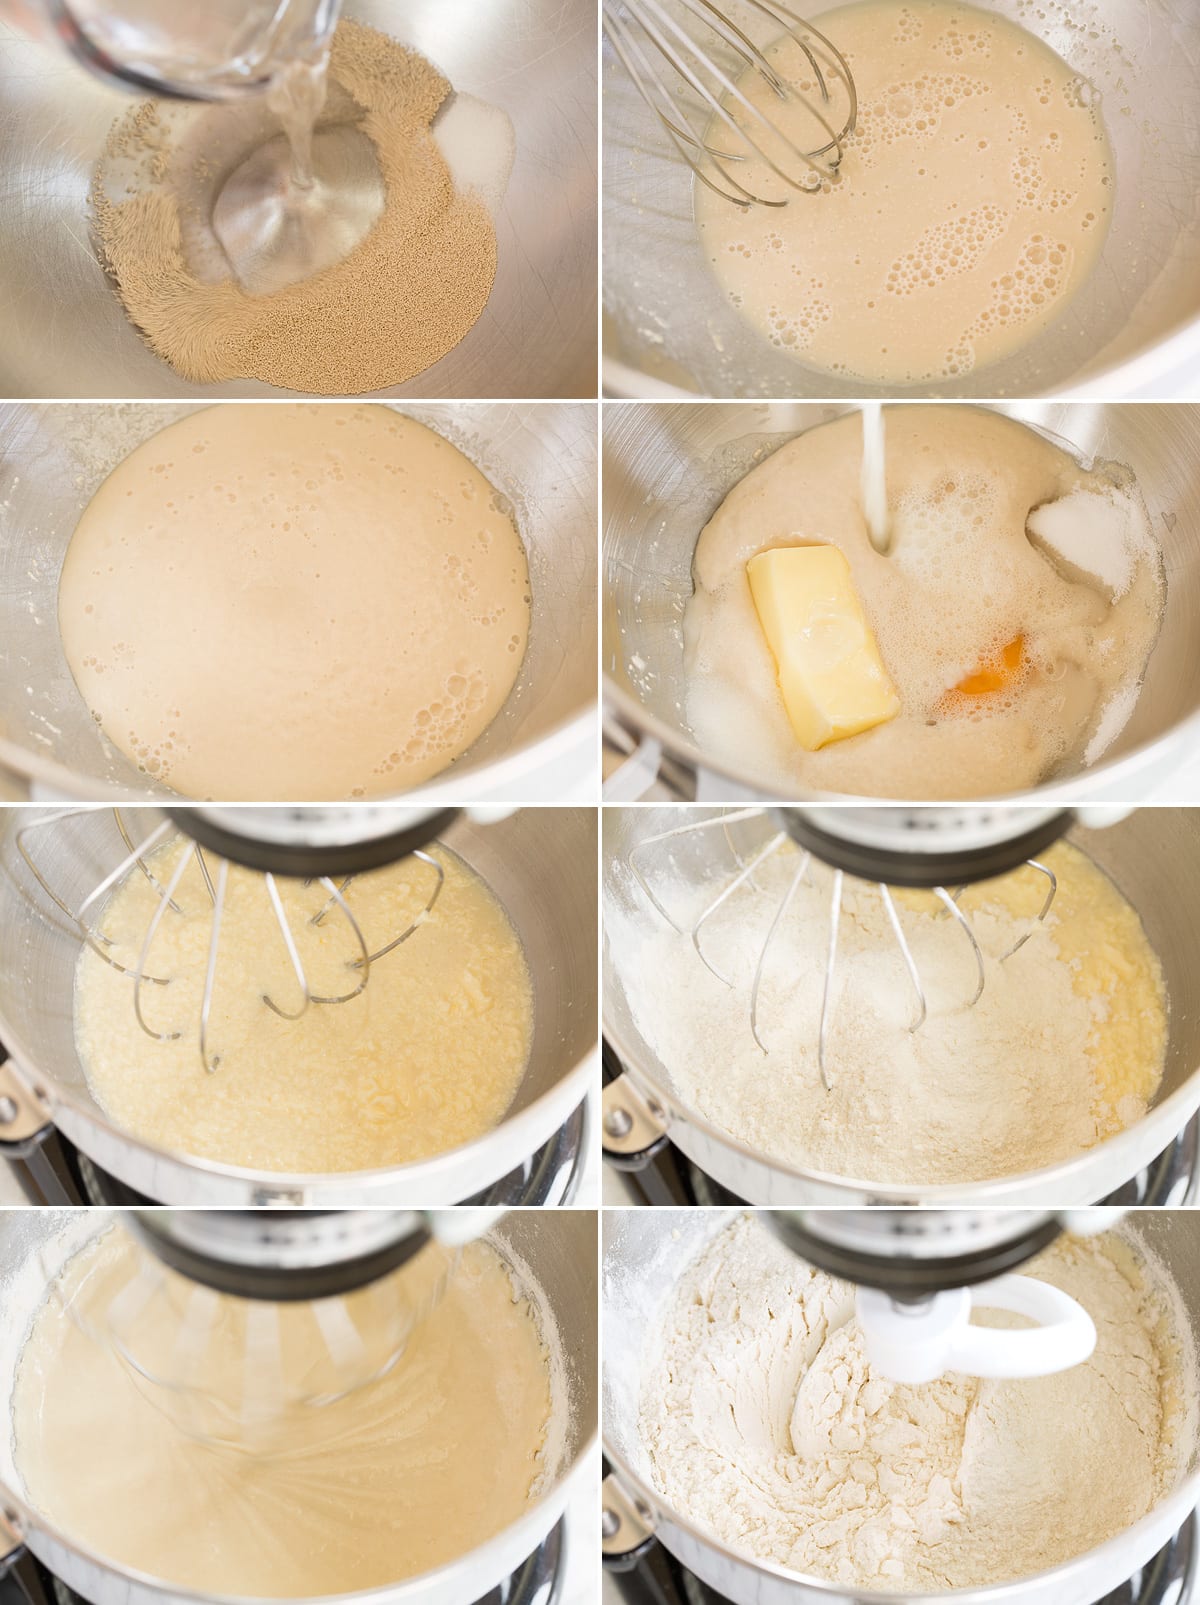 Collage of eight images showing first eight steps to making homemade dinner rolls. Includes proofing yeast in a mixer bowl, adding wet ingredients and mixing then add half the flour and mixing.